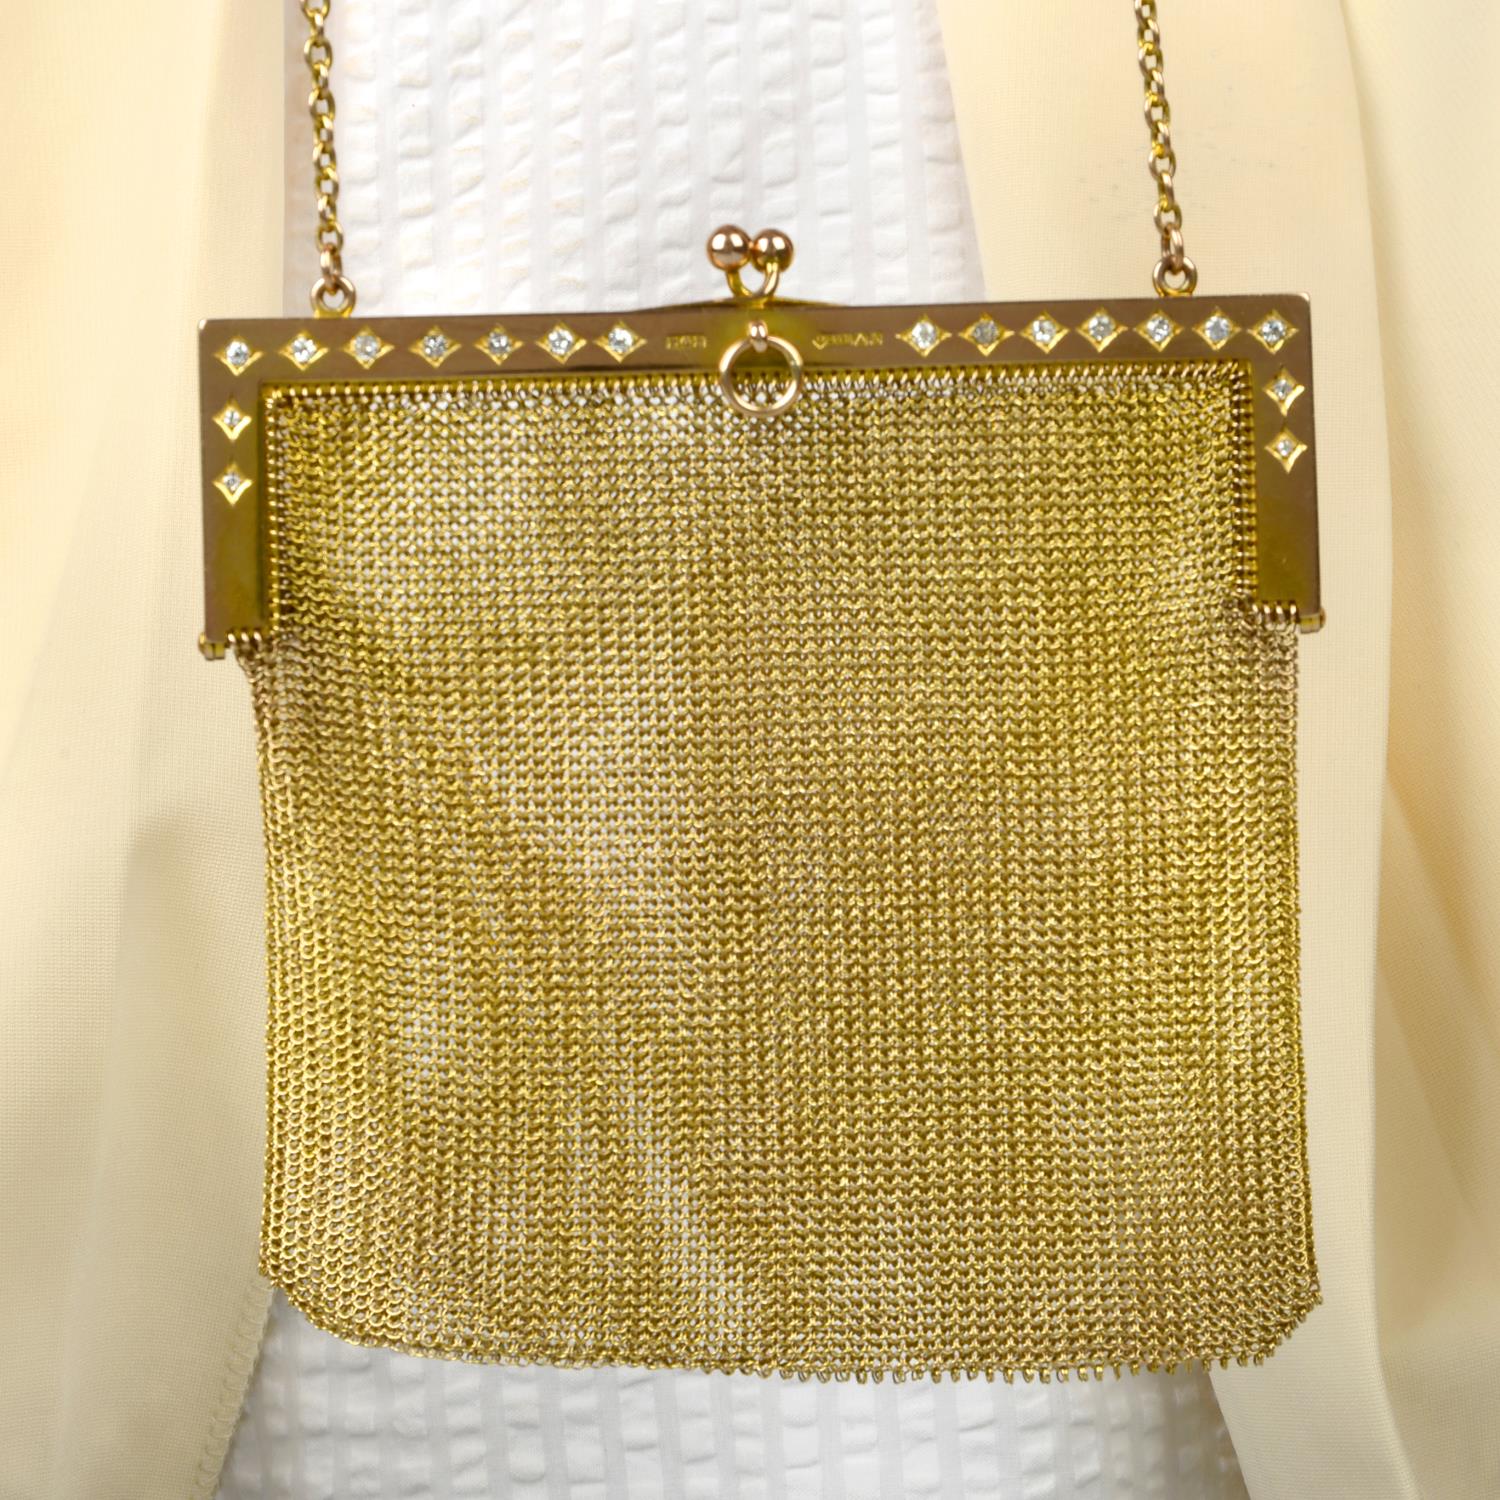 An Edwardian 9ct gold mesh-link purse, with old-cut diamond highlights.